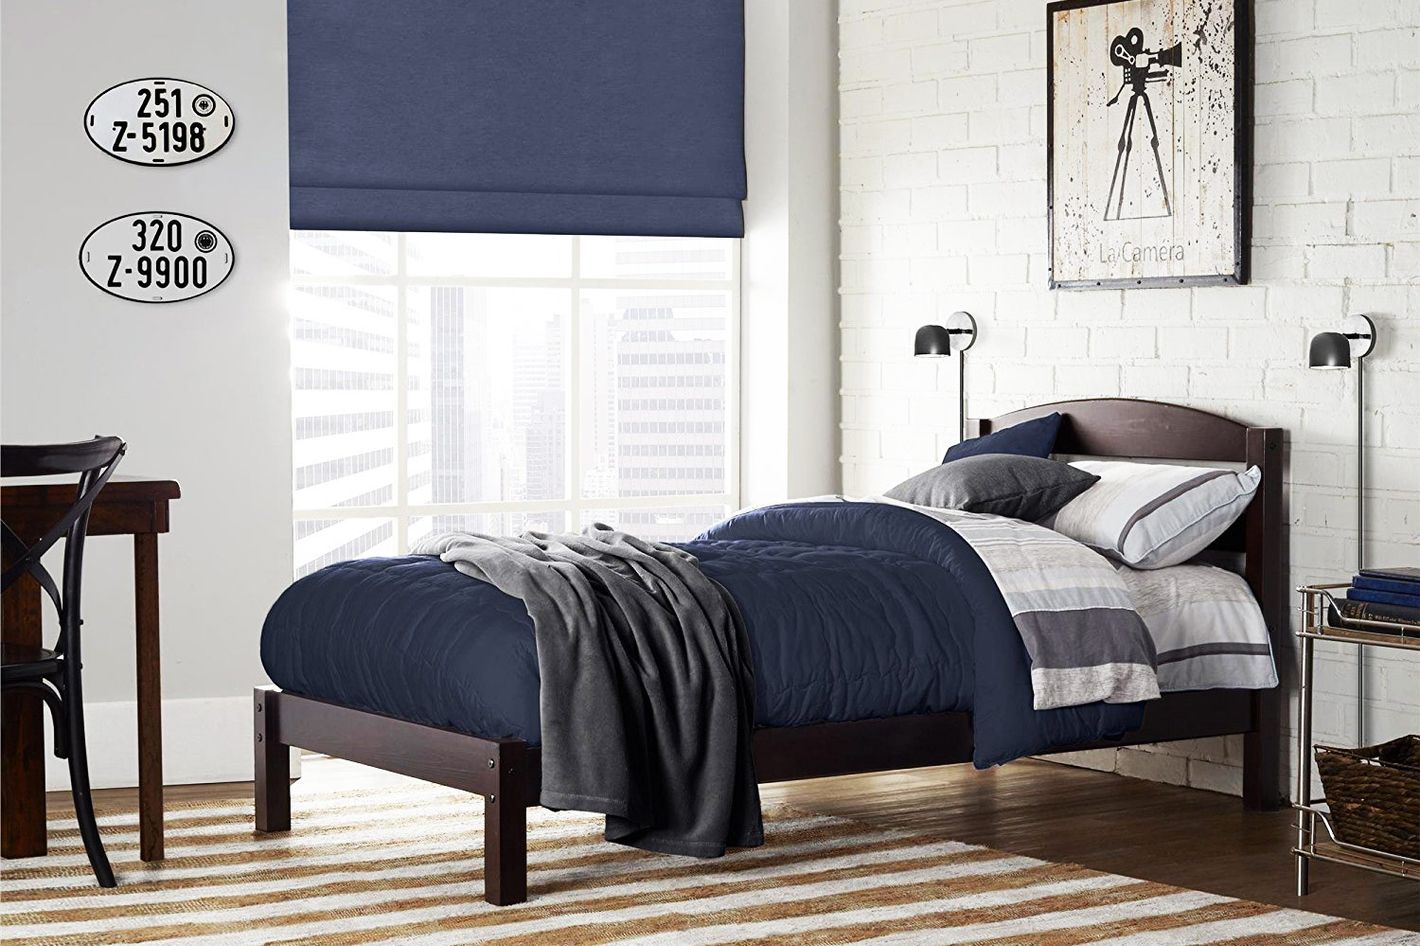 12 Best Twin Beds For Kids 2019, Twin Bed Frame Under 100